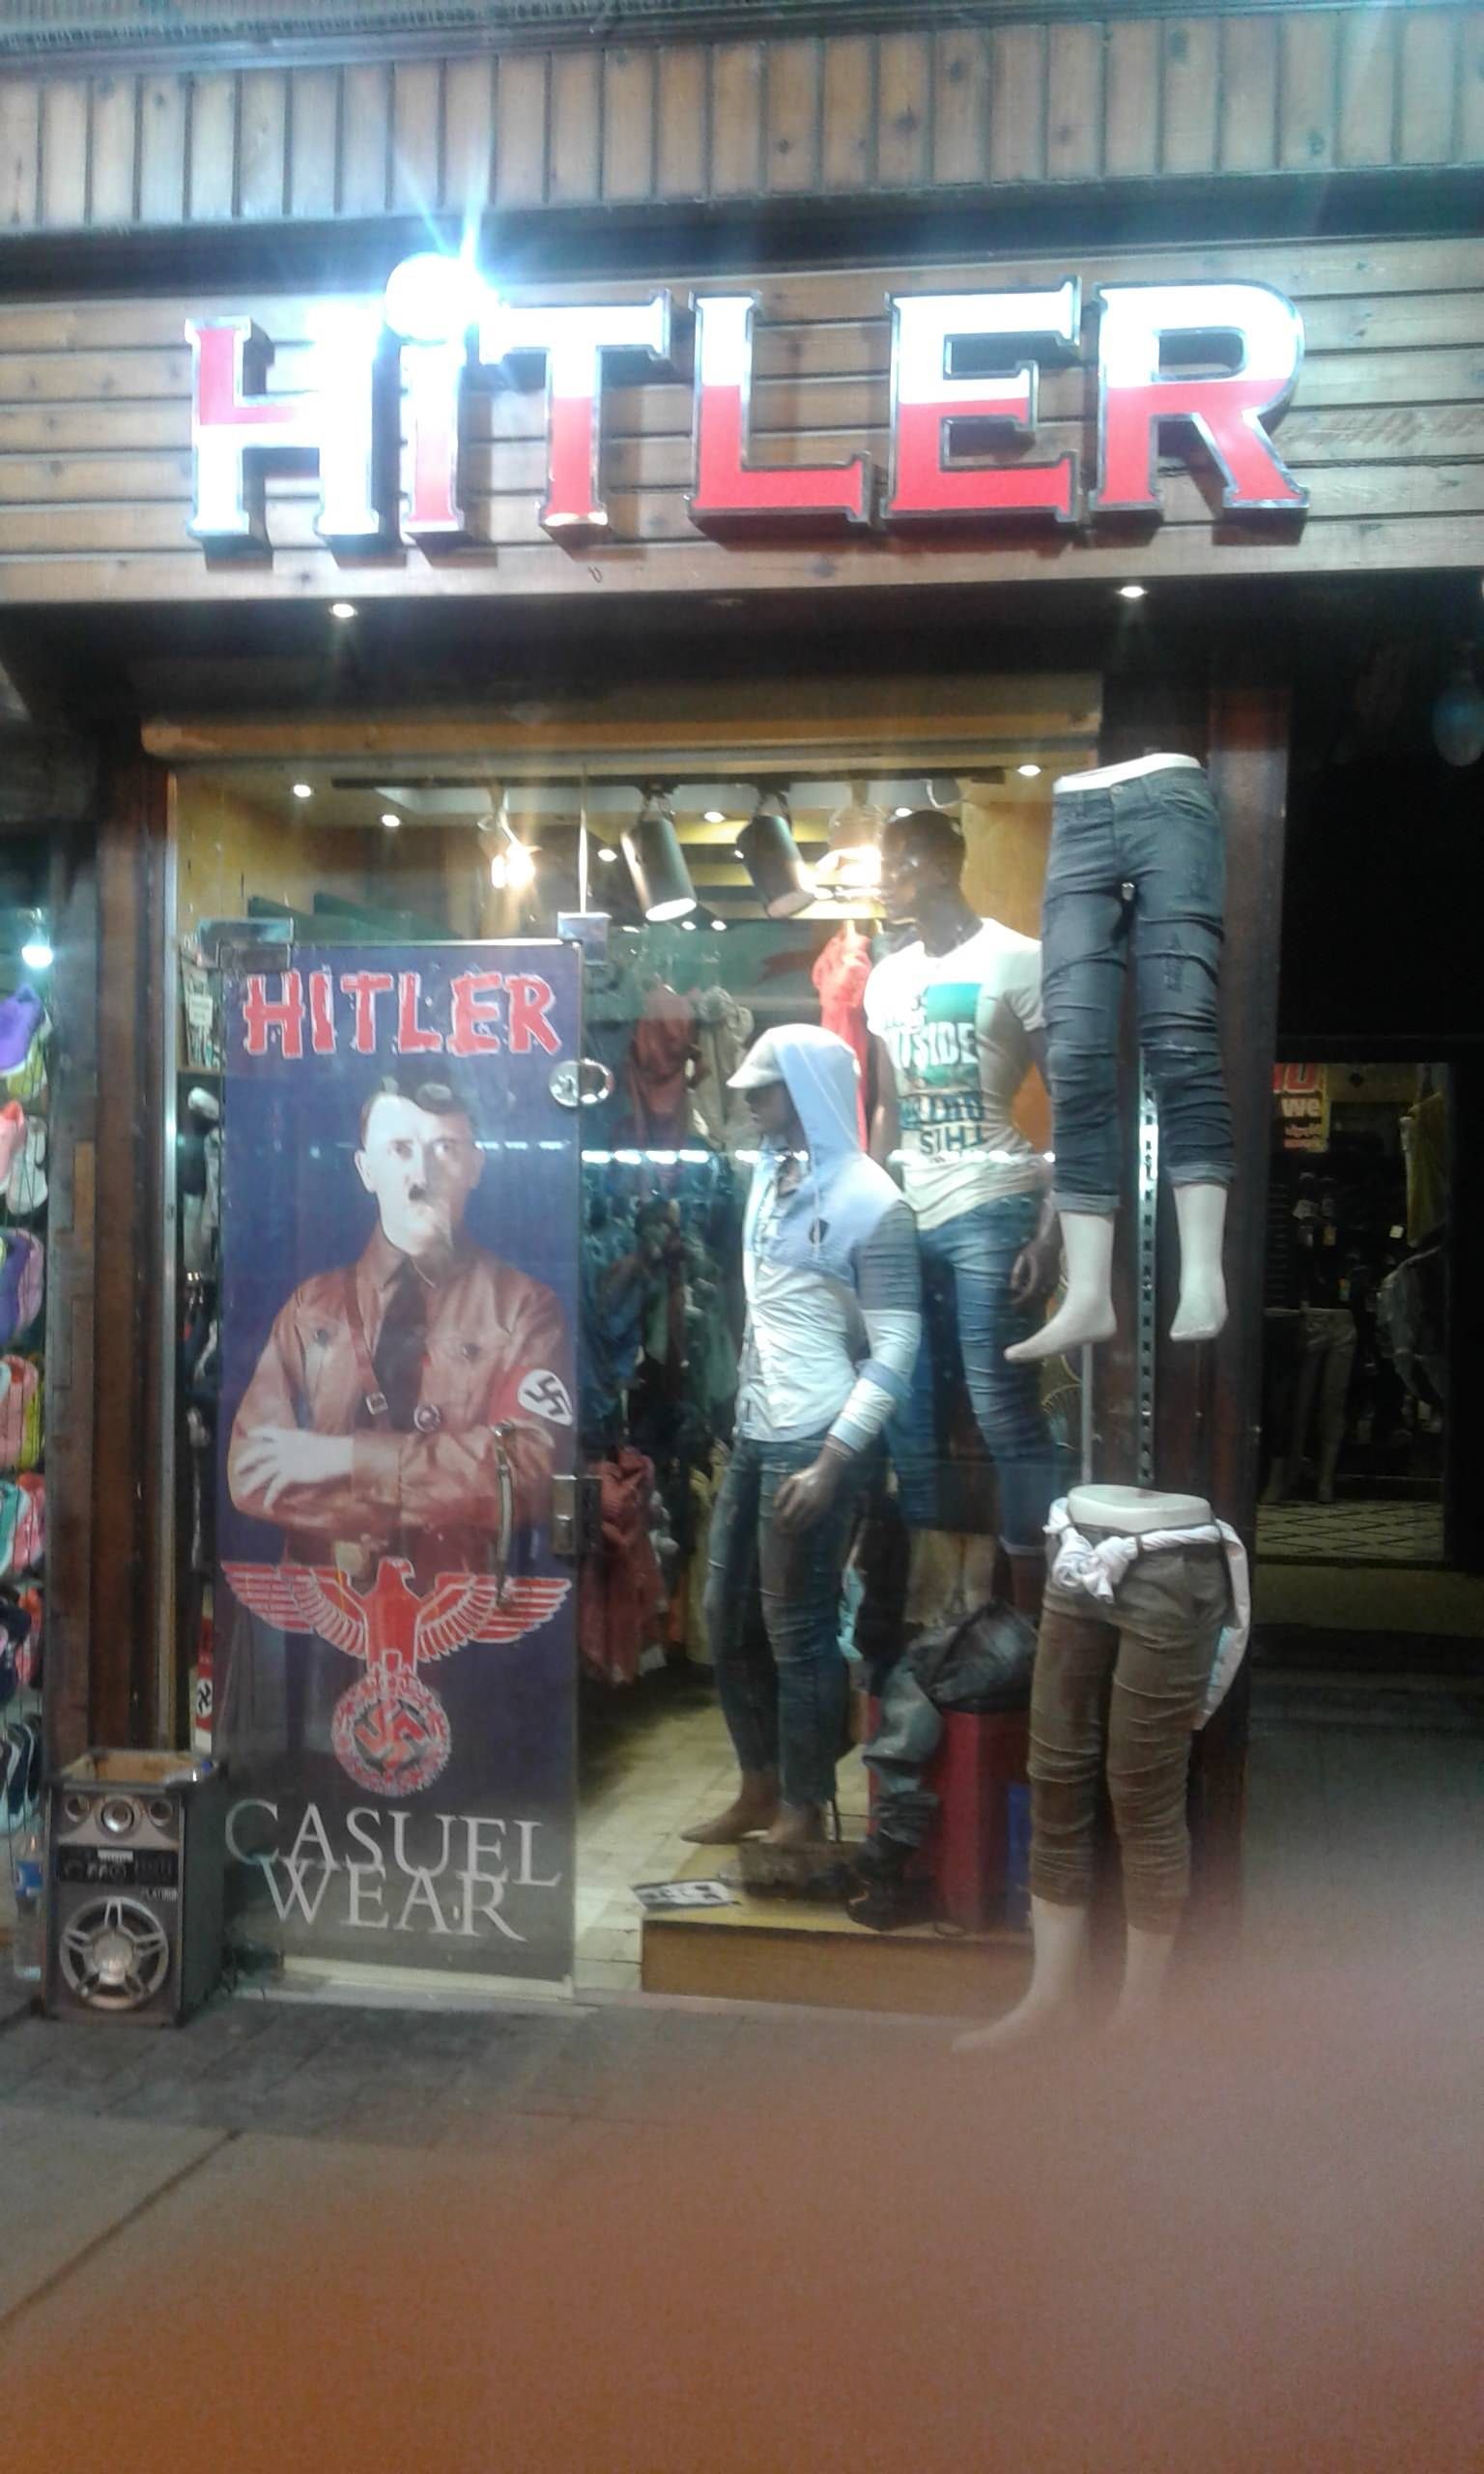 This Egyptian clothing store is very fashy...